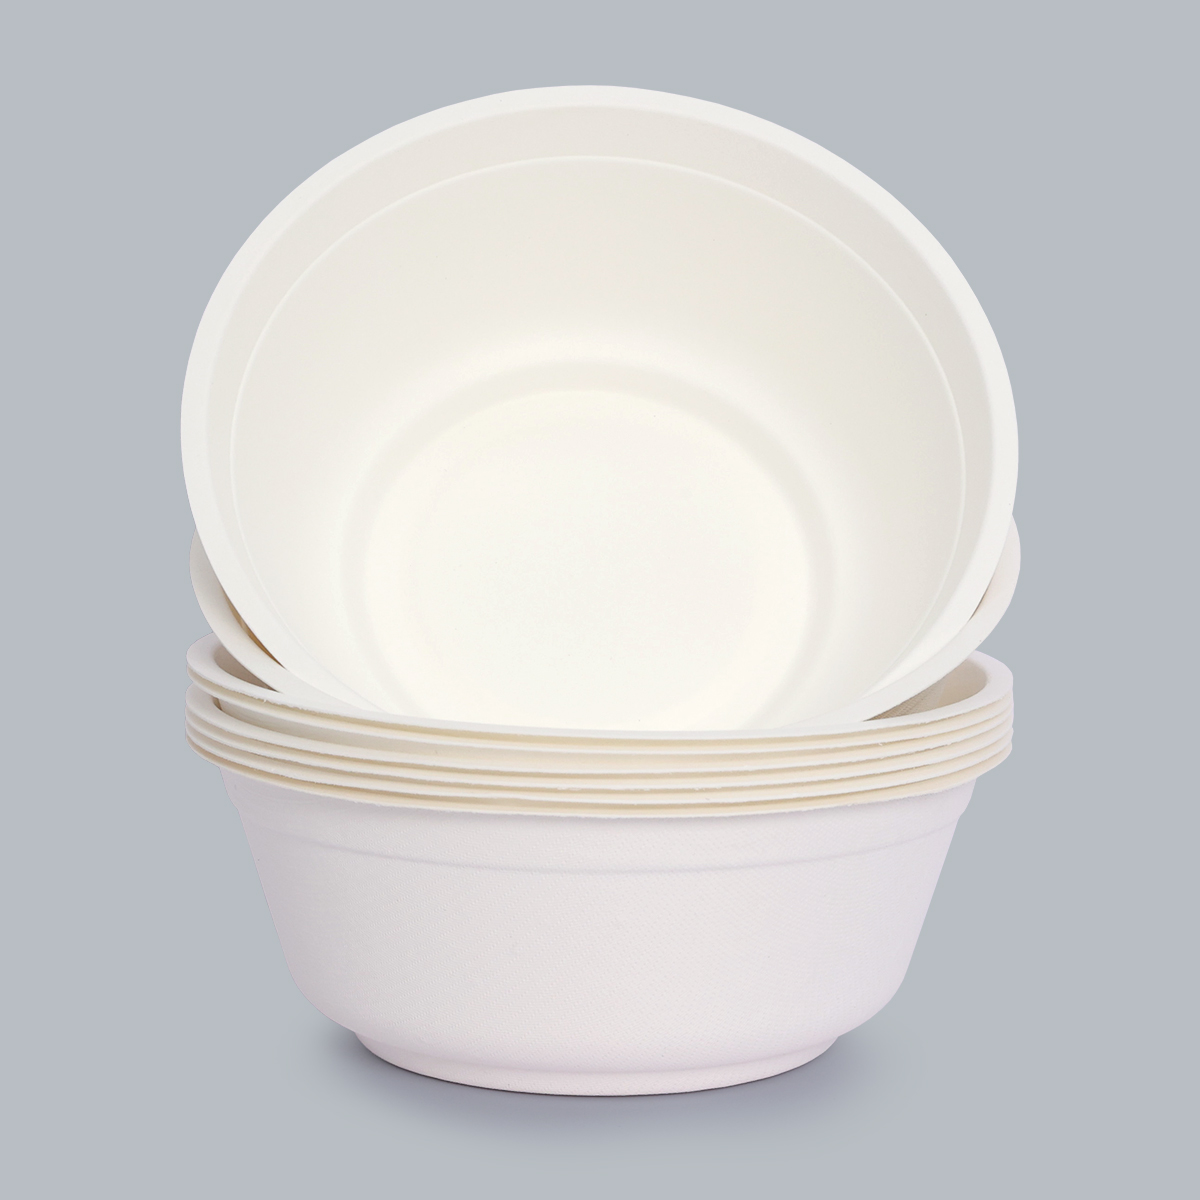 Heat-resistant bowls Eco-friendly bowls Disposable environmentally friendly tableware